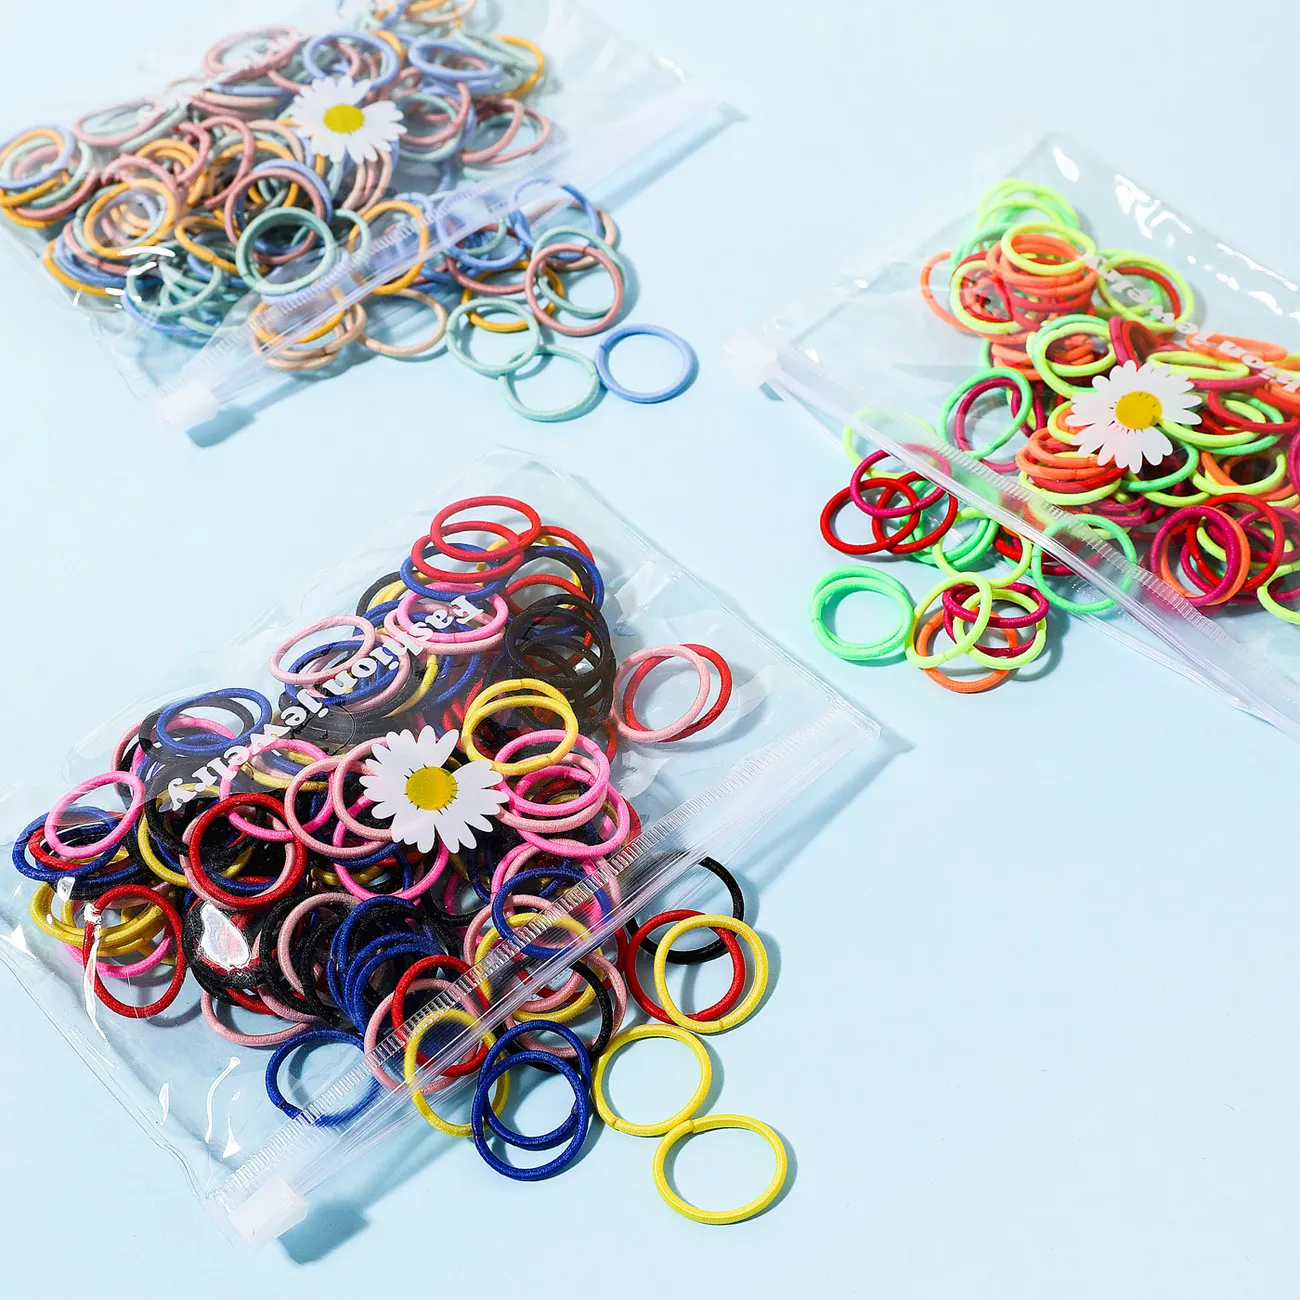 100-pack Multicolor High Flexibility Small Size Hair Ties for Girls Color-A big image 1